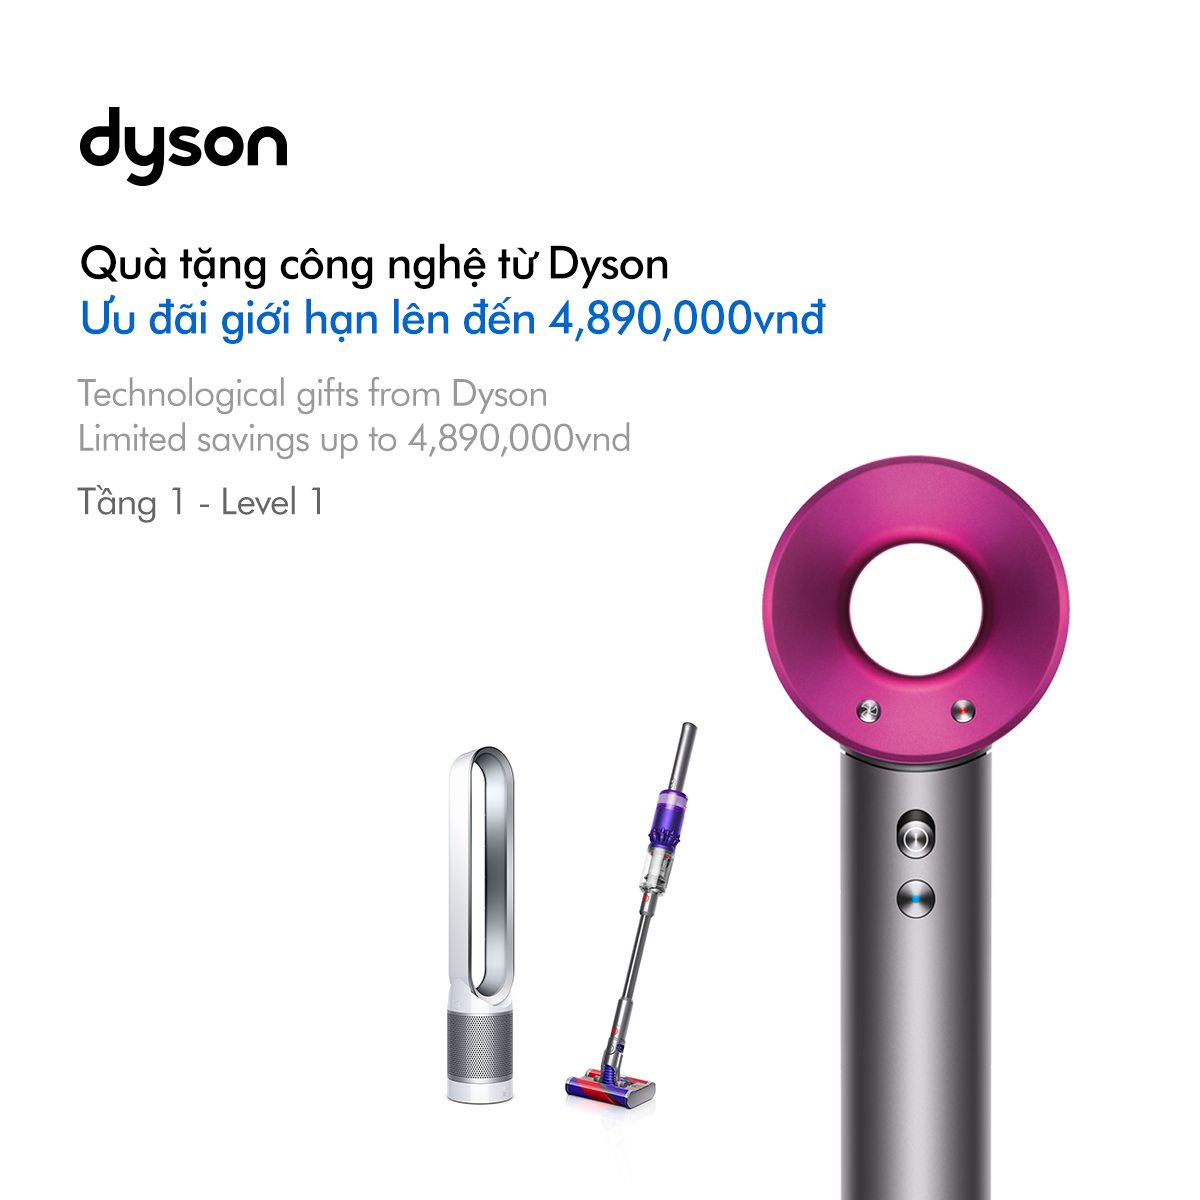 🌟 OPPORTUNITY TO OWN DYSON TECHNOLOGY WITH LIMITED OFFERS UP TO 4,890,000đ 🌟